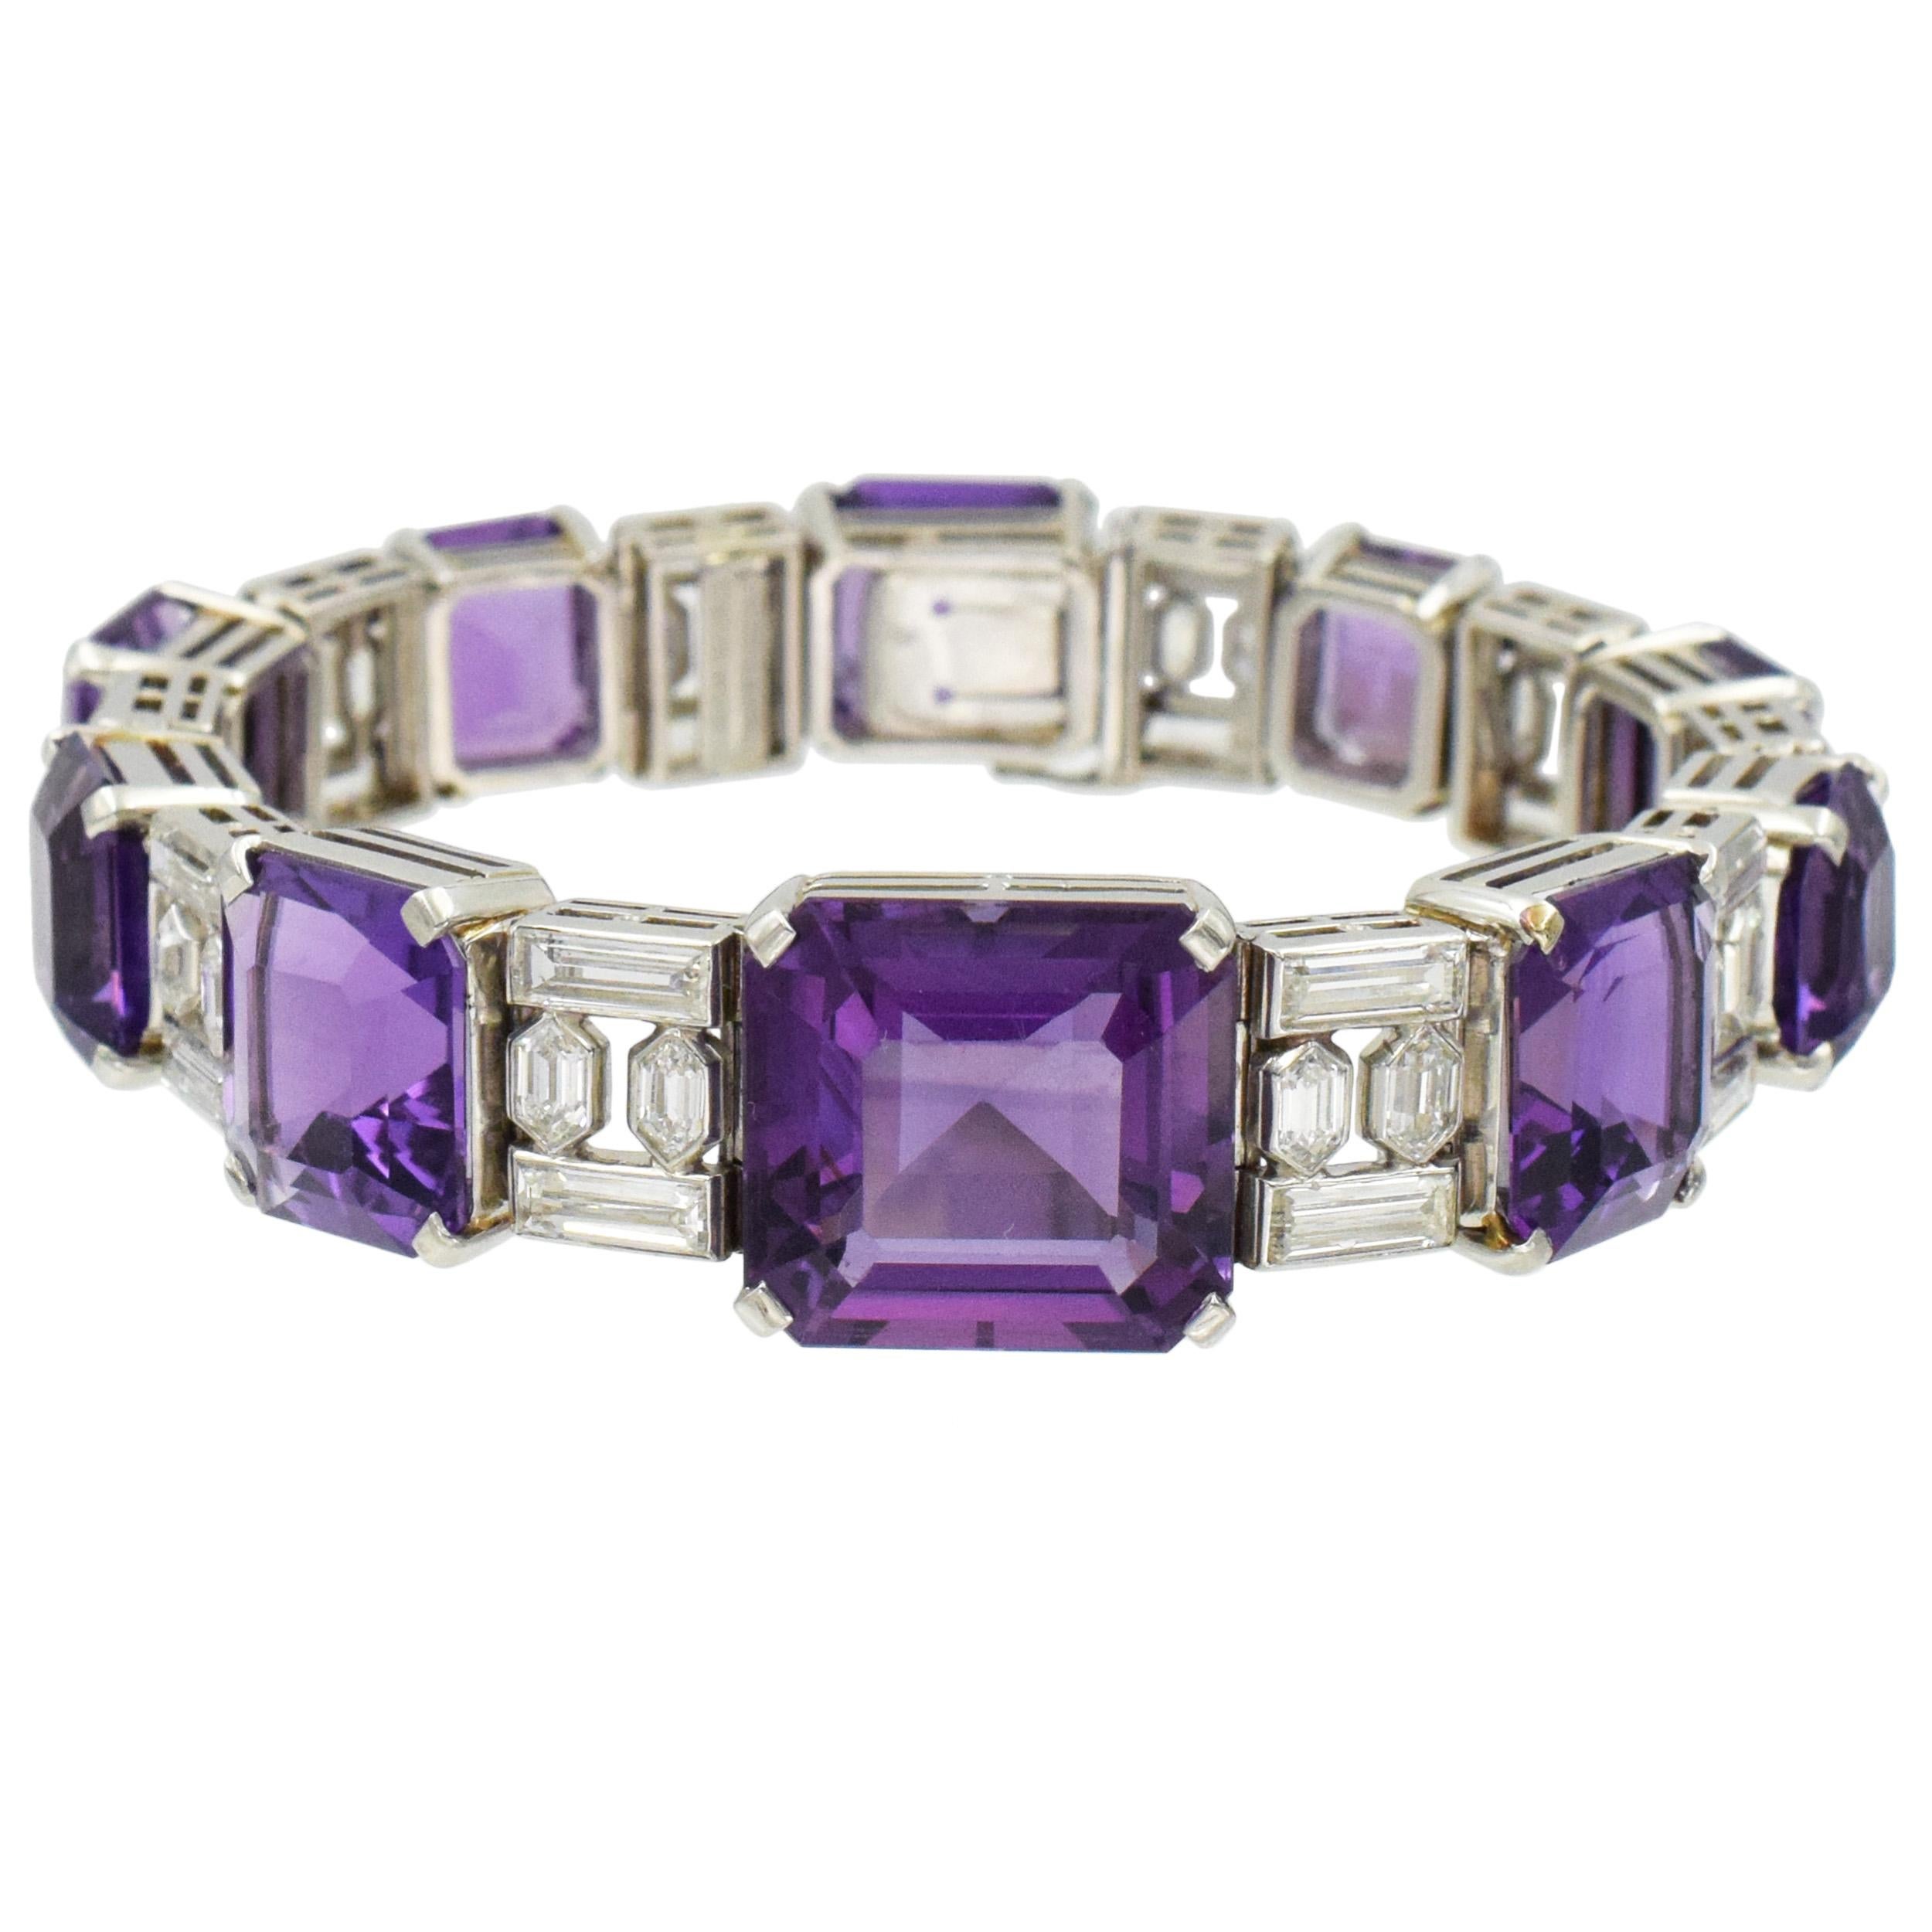 Van Cleef And Arpels diamond and amethyst line bracelet in platinum. 
The bracelet features 10 emerald cut amethysts graduating in size, alternating with 10 links consisting of 2 baguette and 2 hexagonal cut diamonds each. There is total of 20